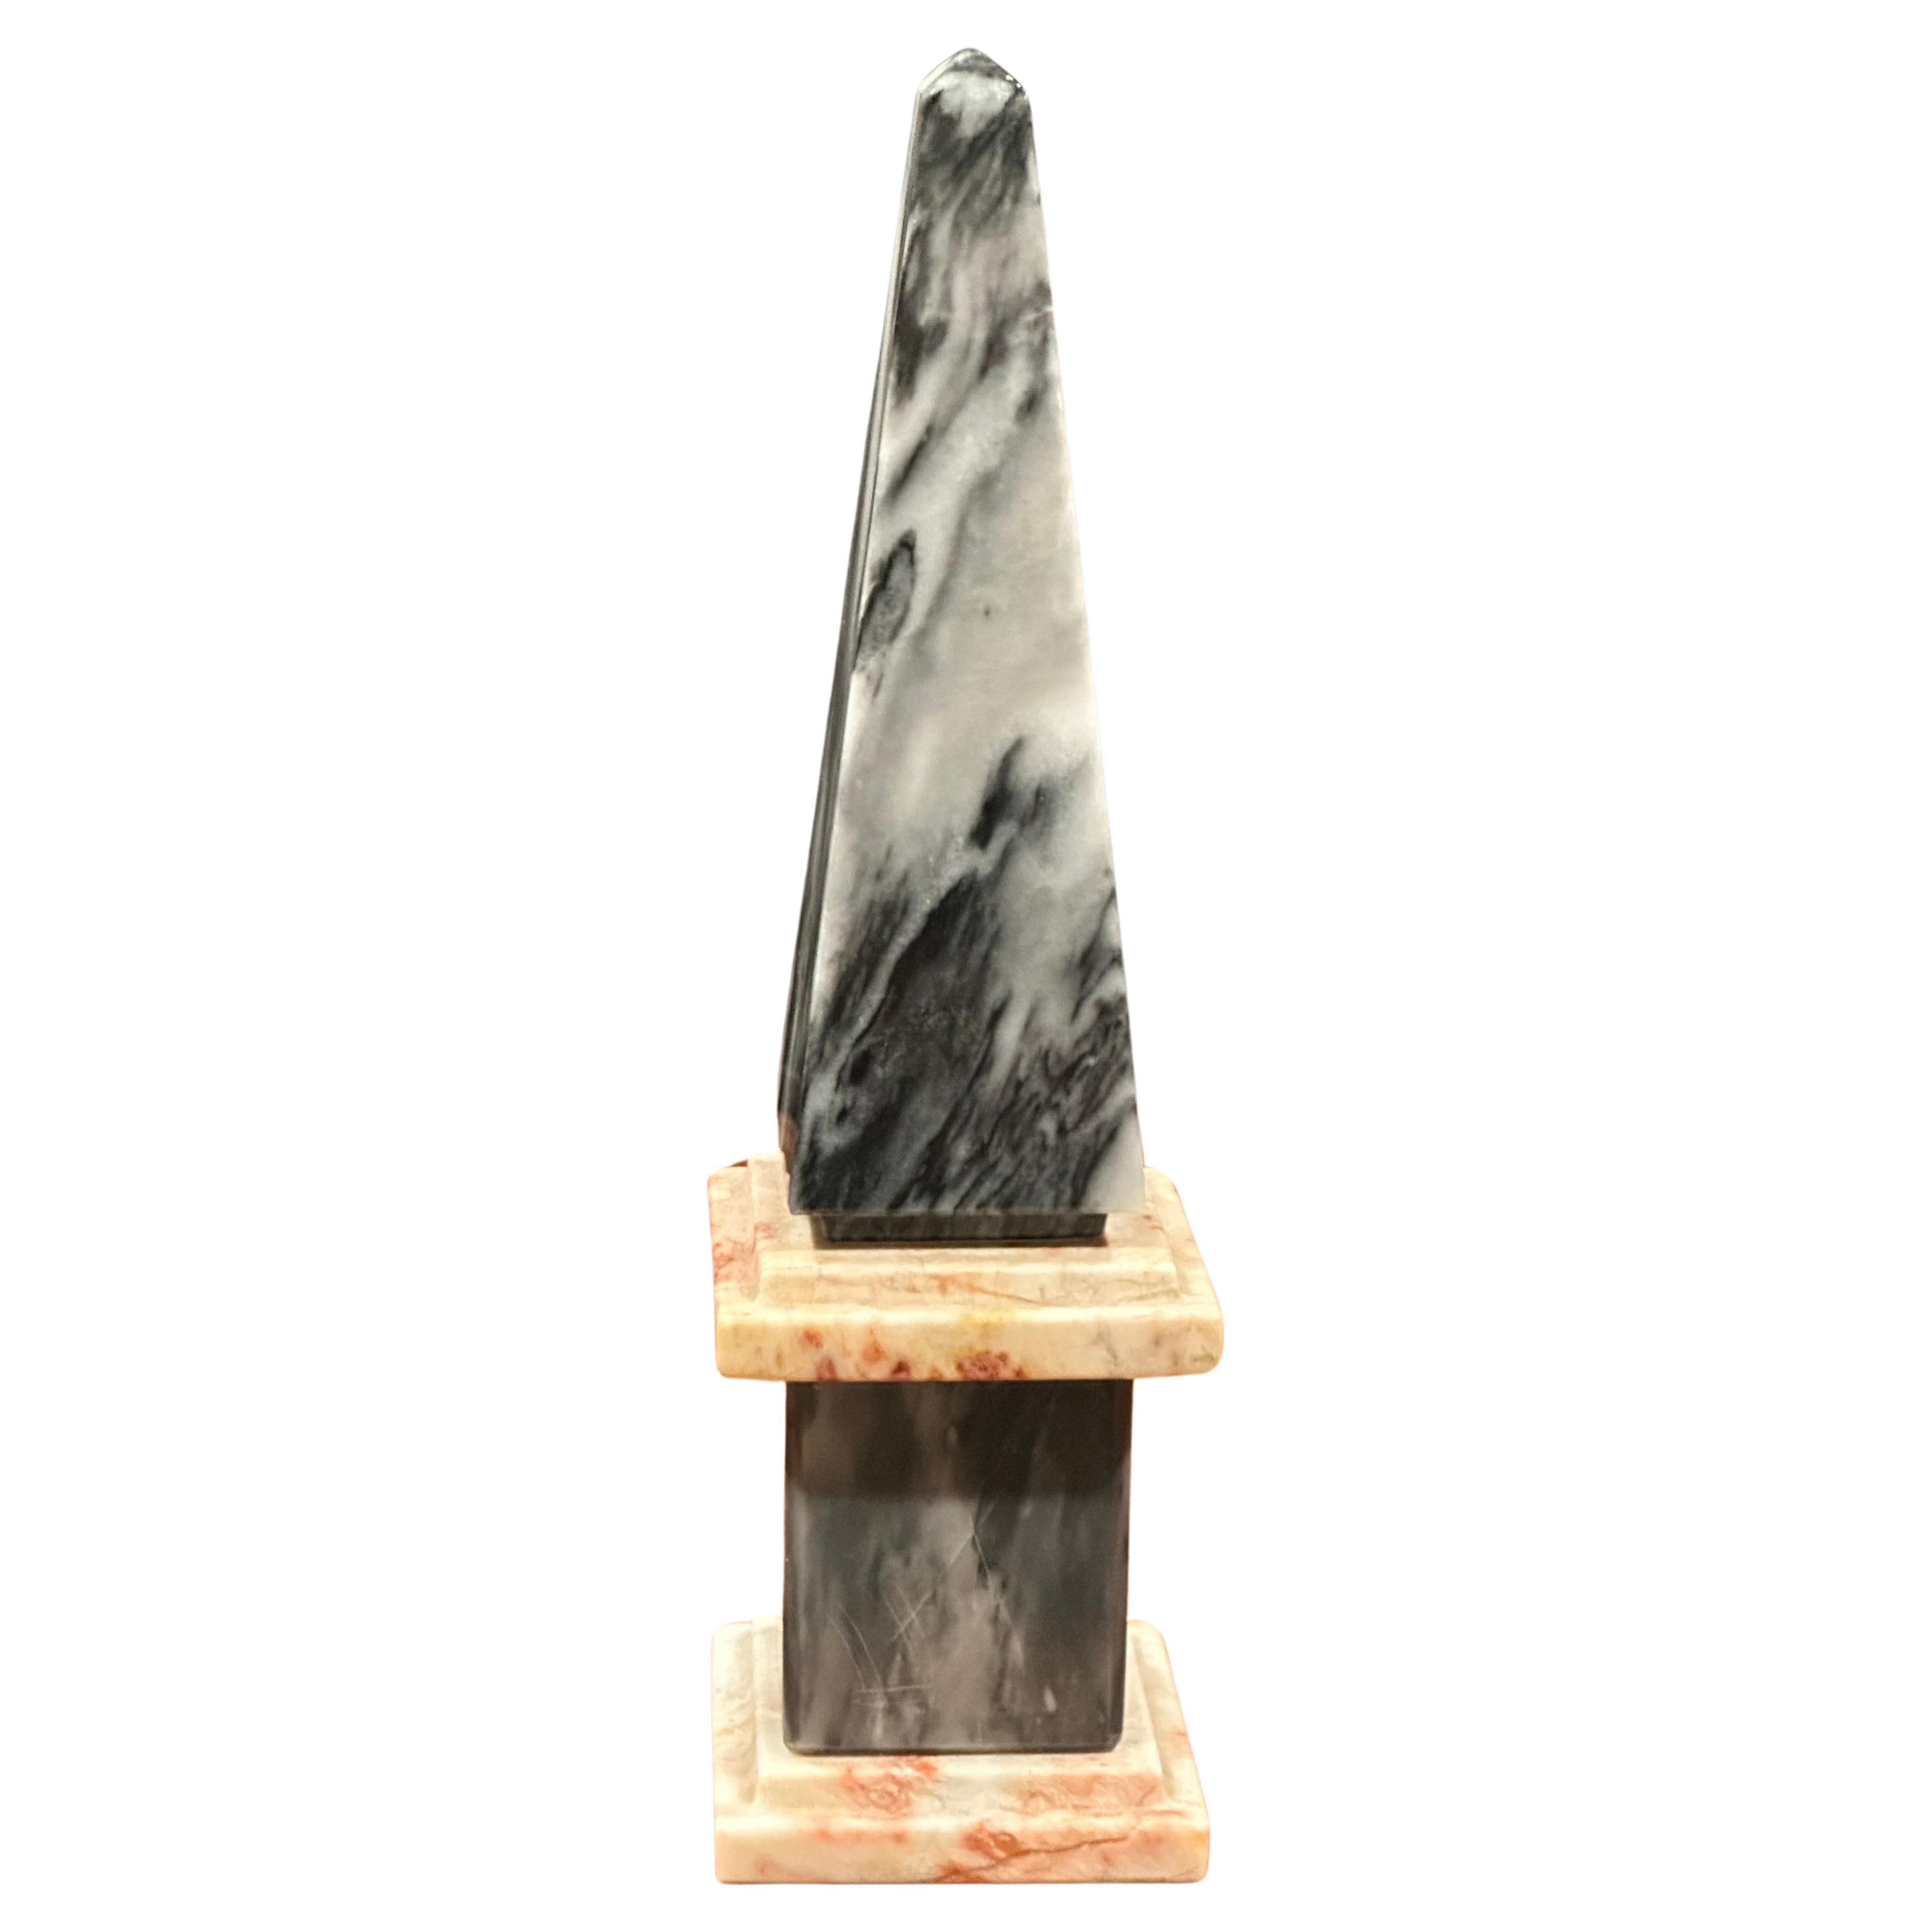 Beautiful solid Italian marble decorative obelisk, circa 1980s. The piece is in very good vintage condition with no chips or cracks and is nicely polished. The piece is 2.75